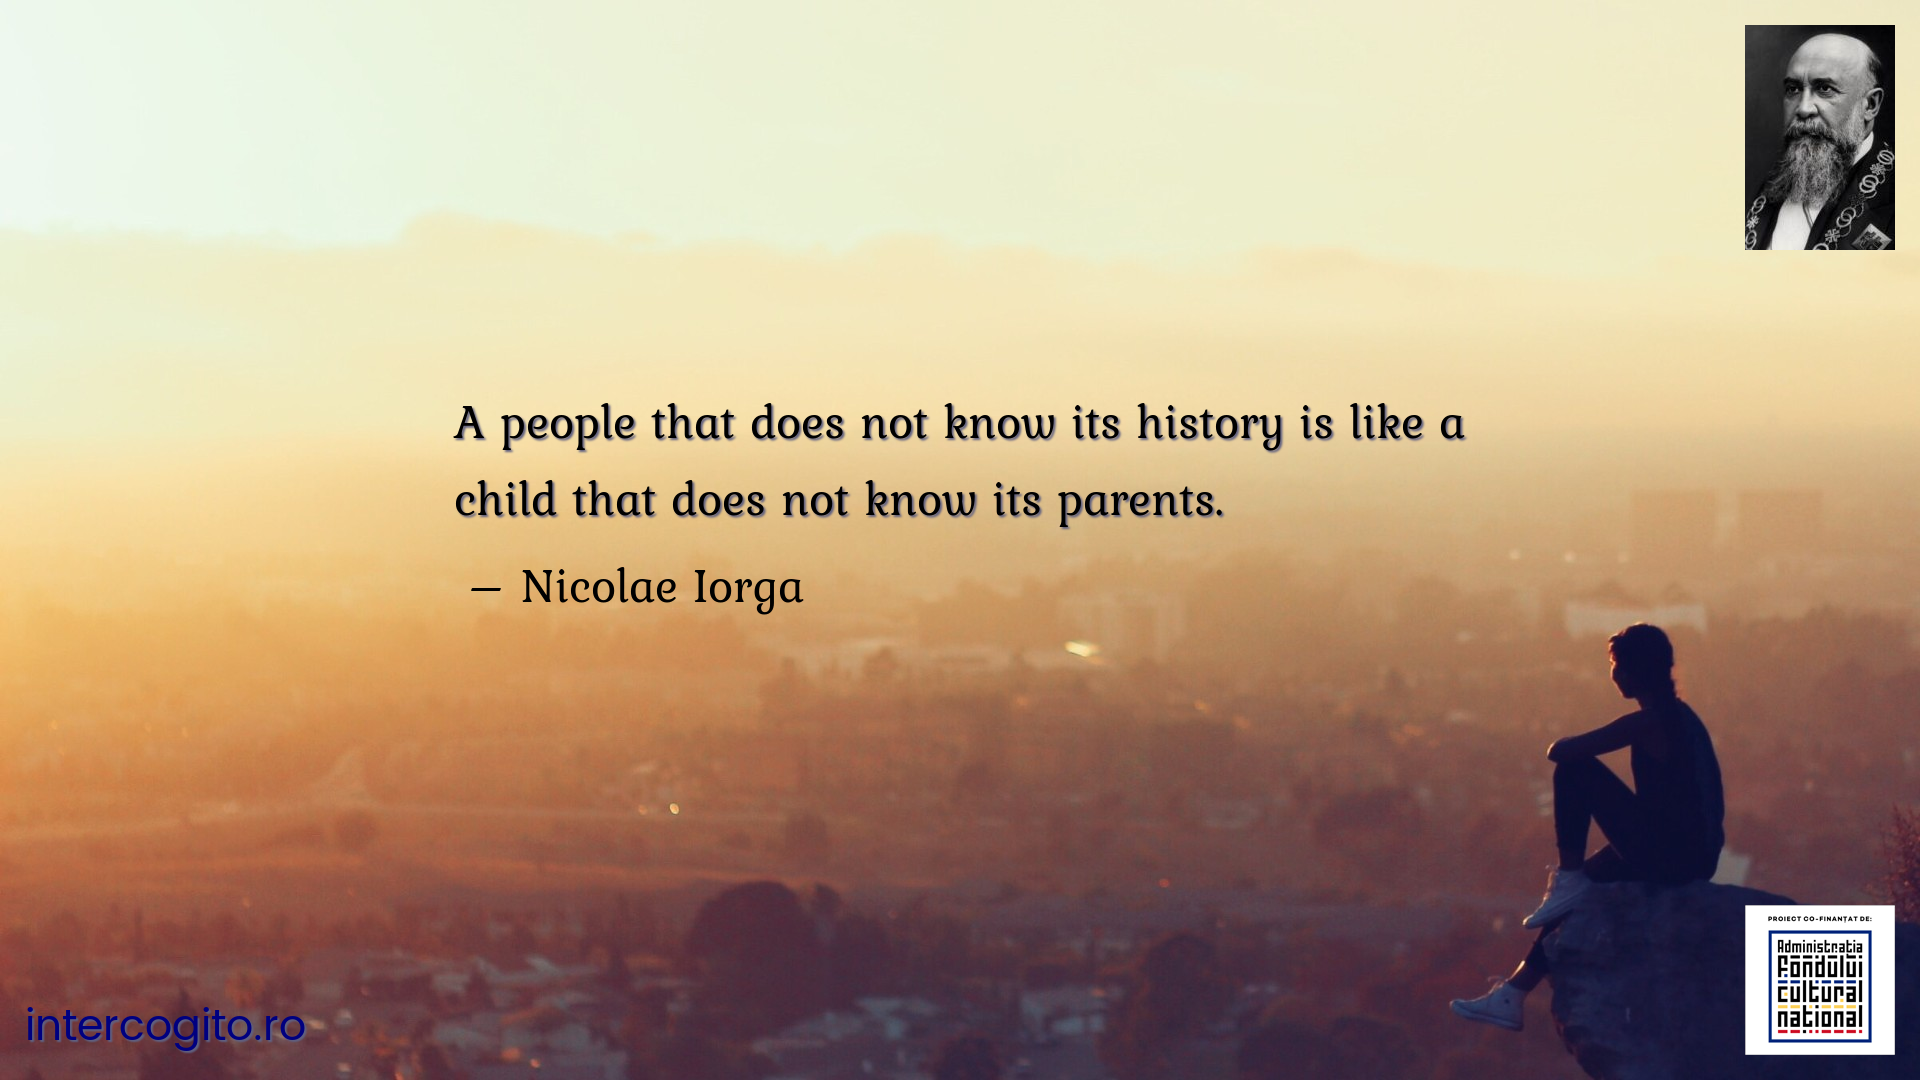 A people that does not know its history is like a child that does not know its parents.